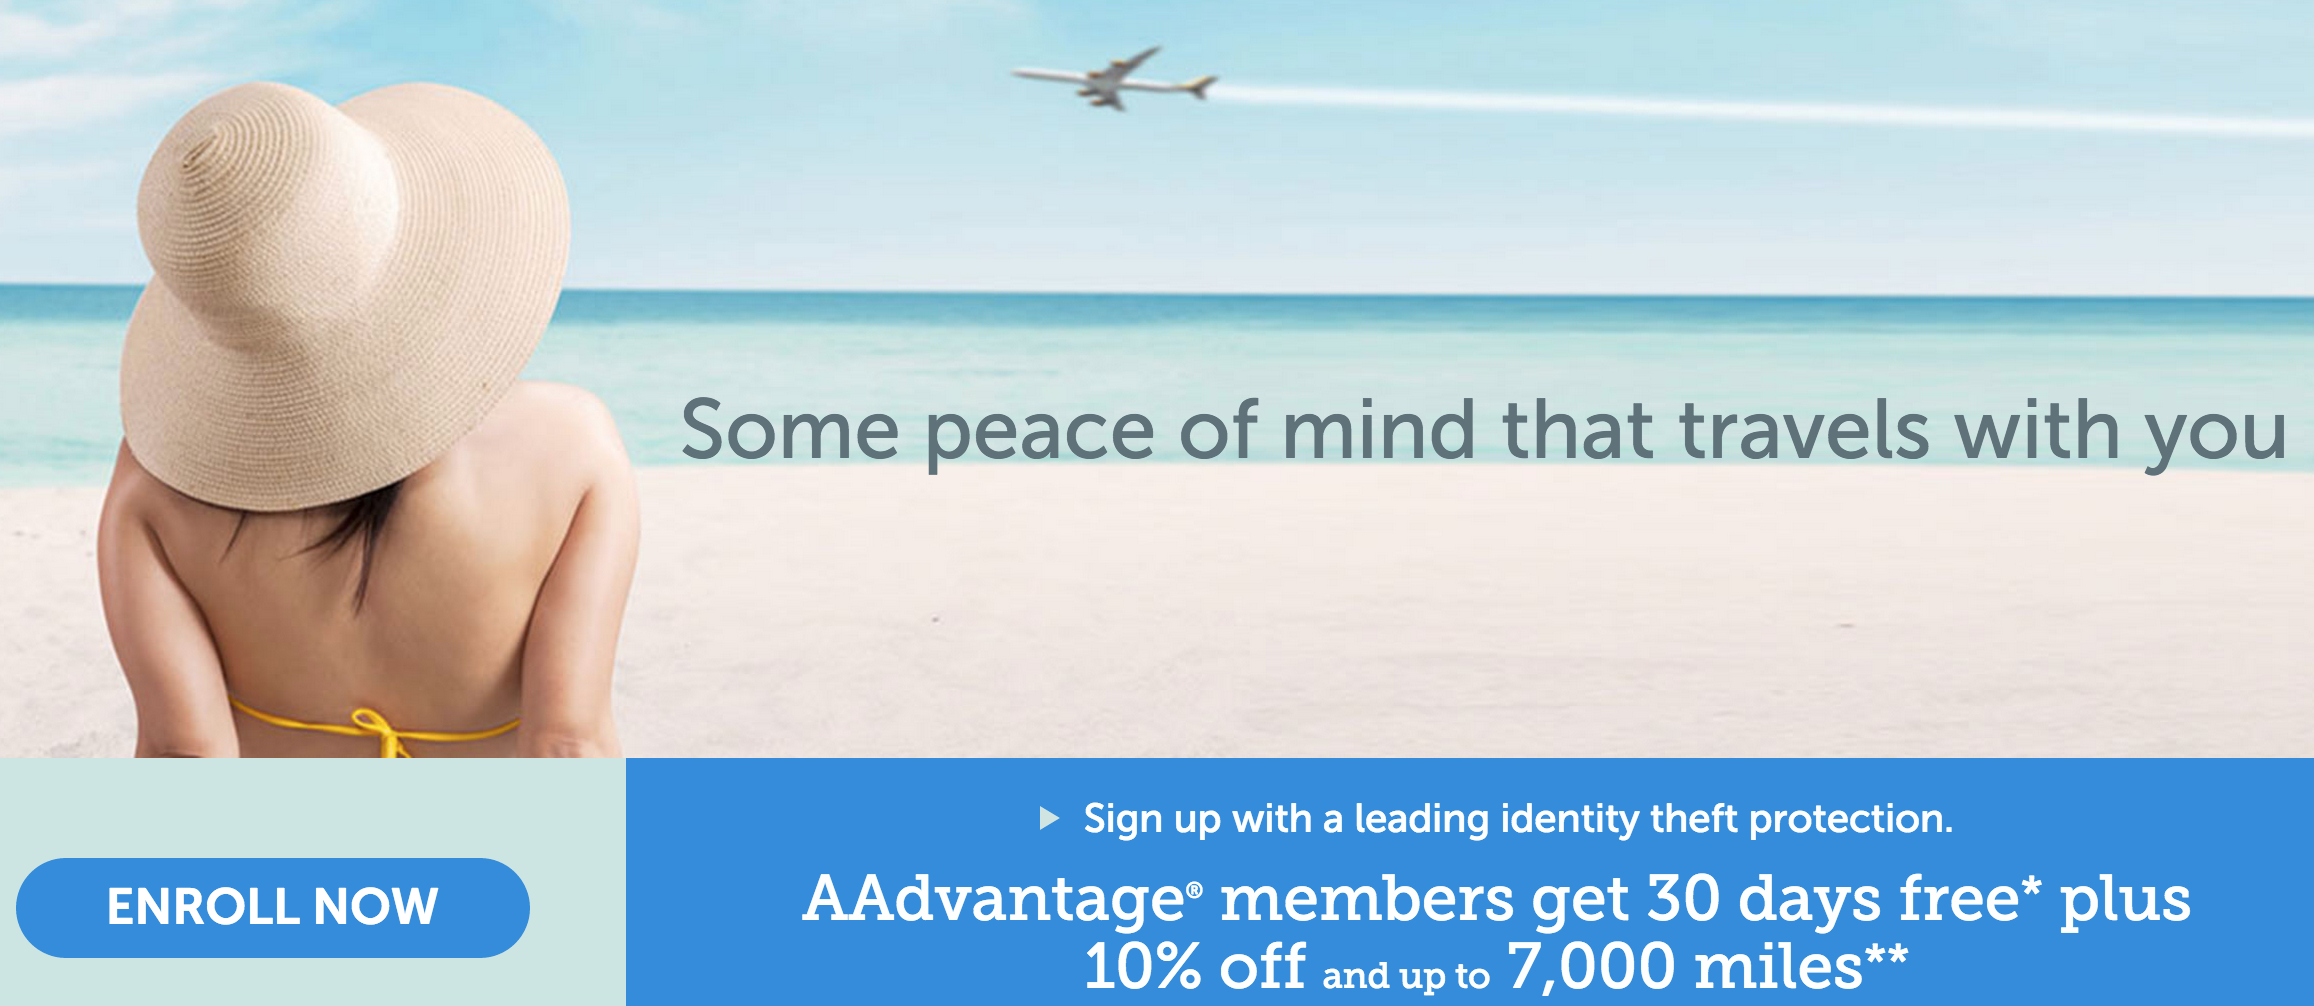 Earn up to 7,000 AAdvantage miles with LifeLock